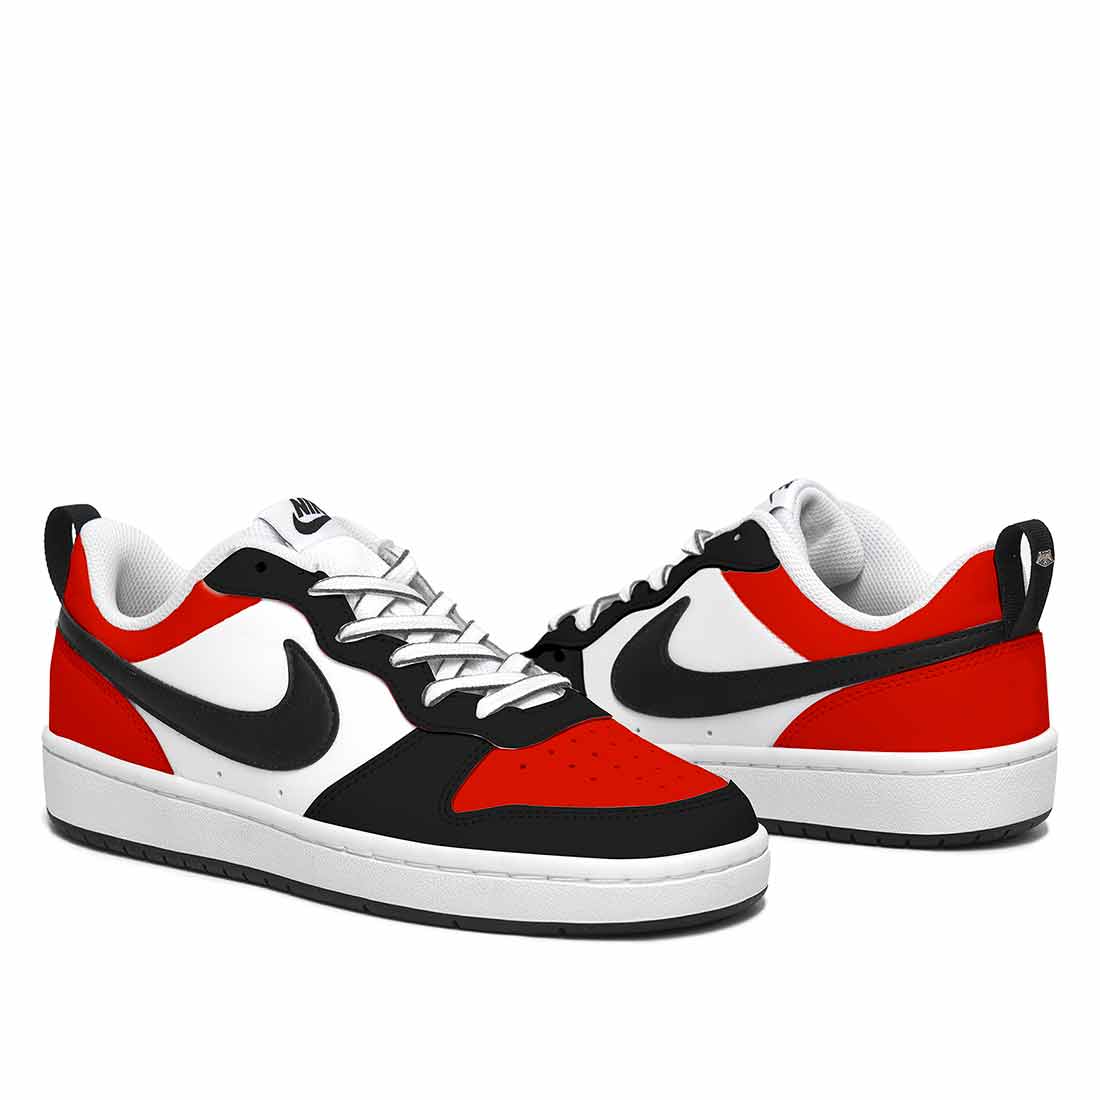 Nike Court - Rosse Nere | Sped. GRATIS in 24h – Racoon